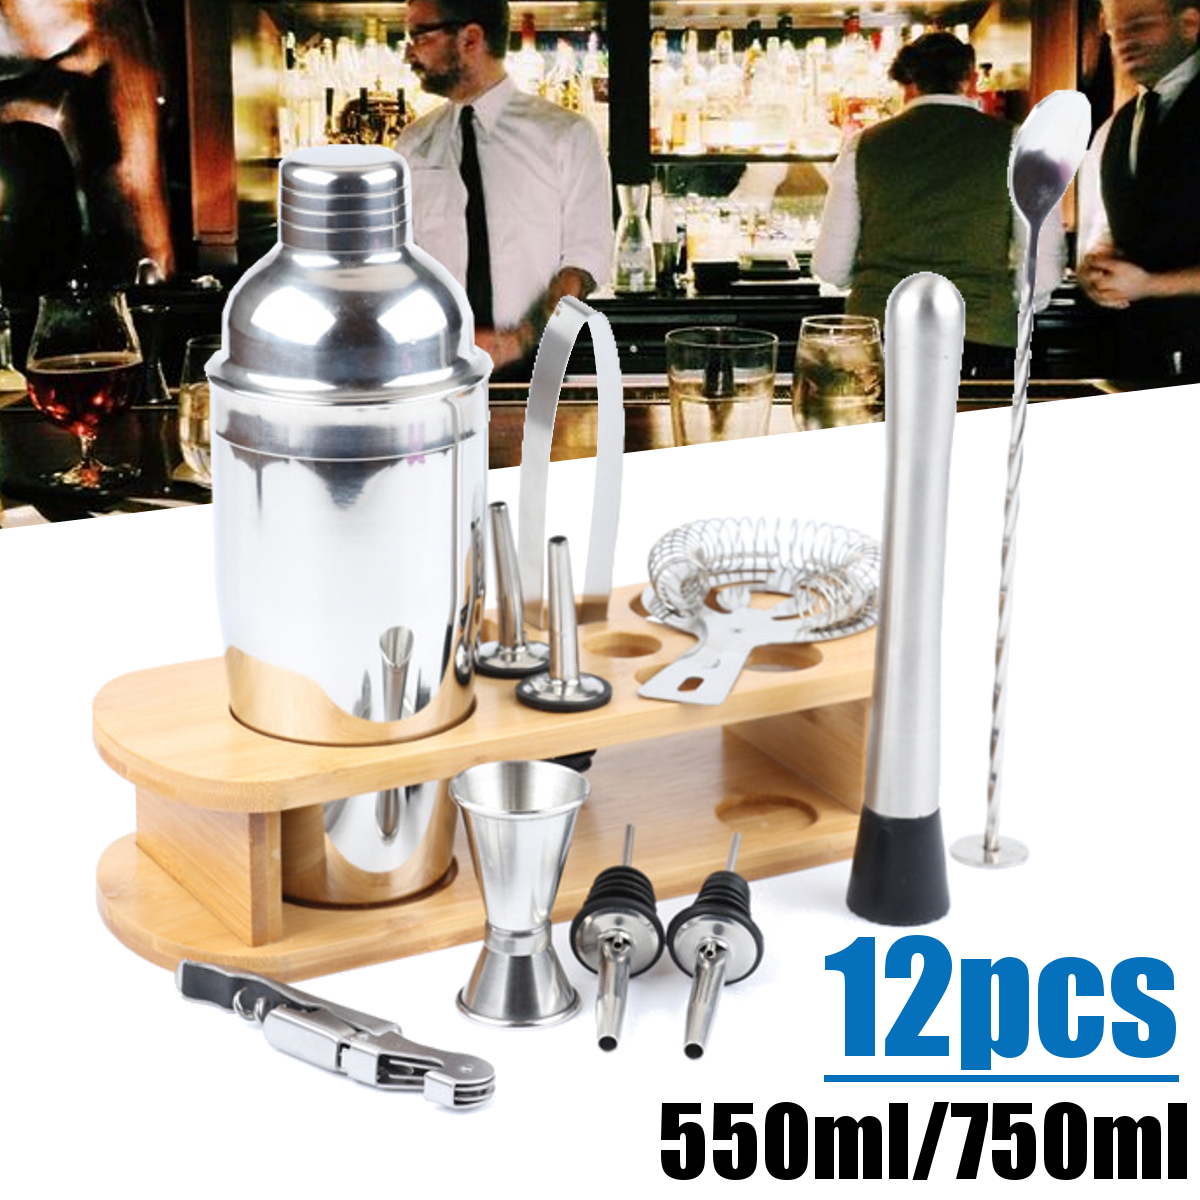 12pcs-Boston-Cocktail-Shaker-Bar-Stainless-Steel-Bartender-Mixer-with-Base-1750467-1